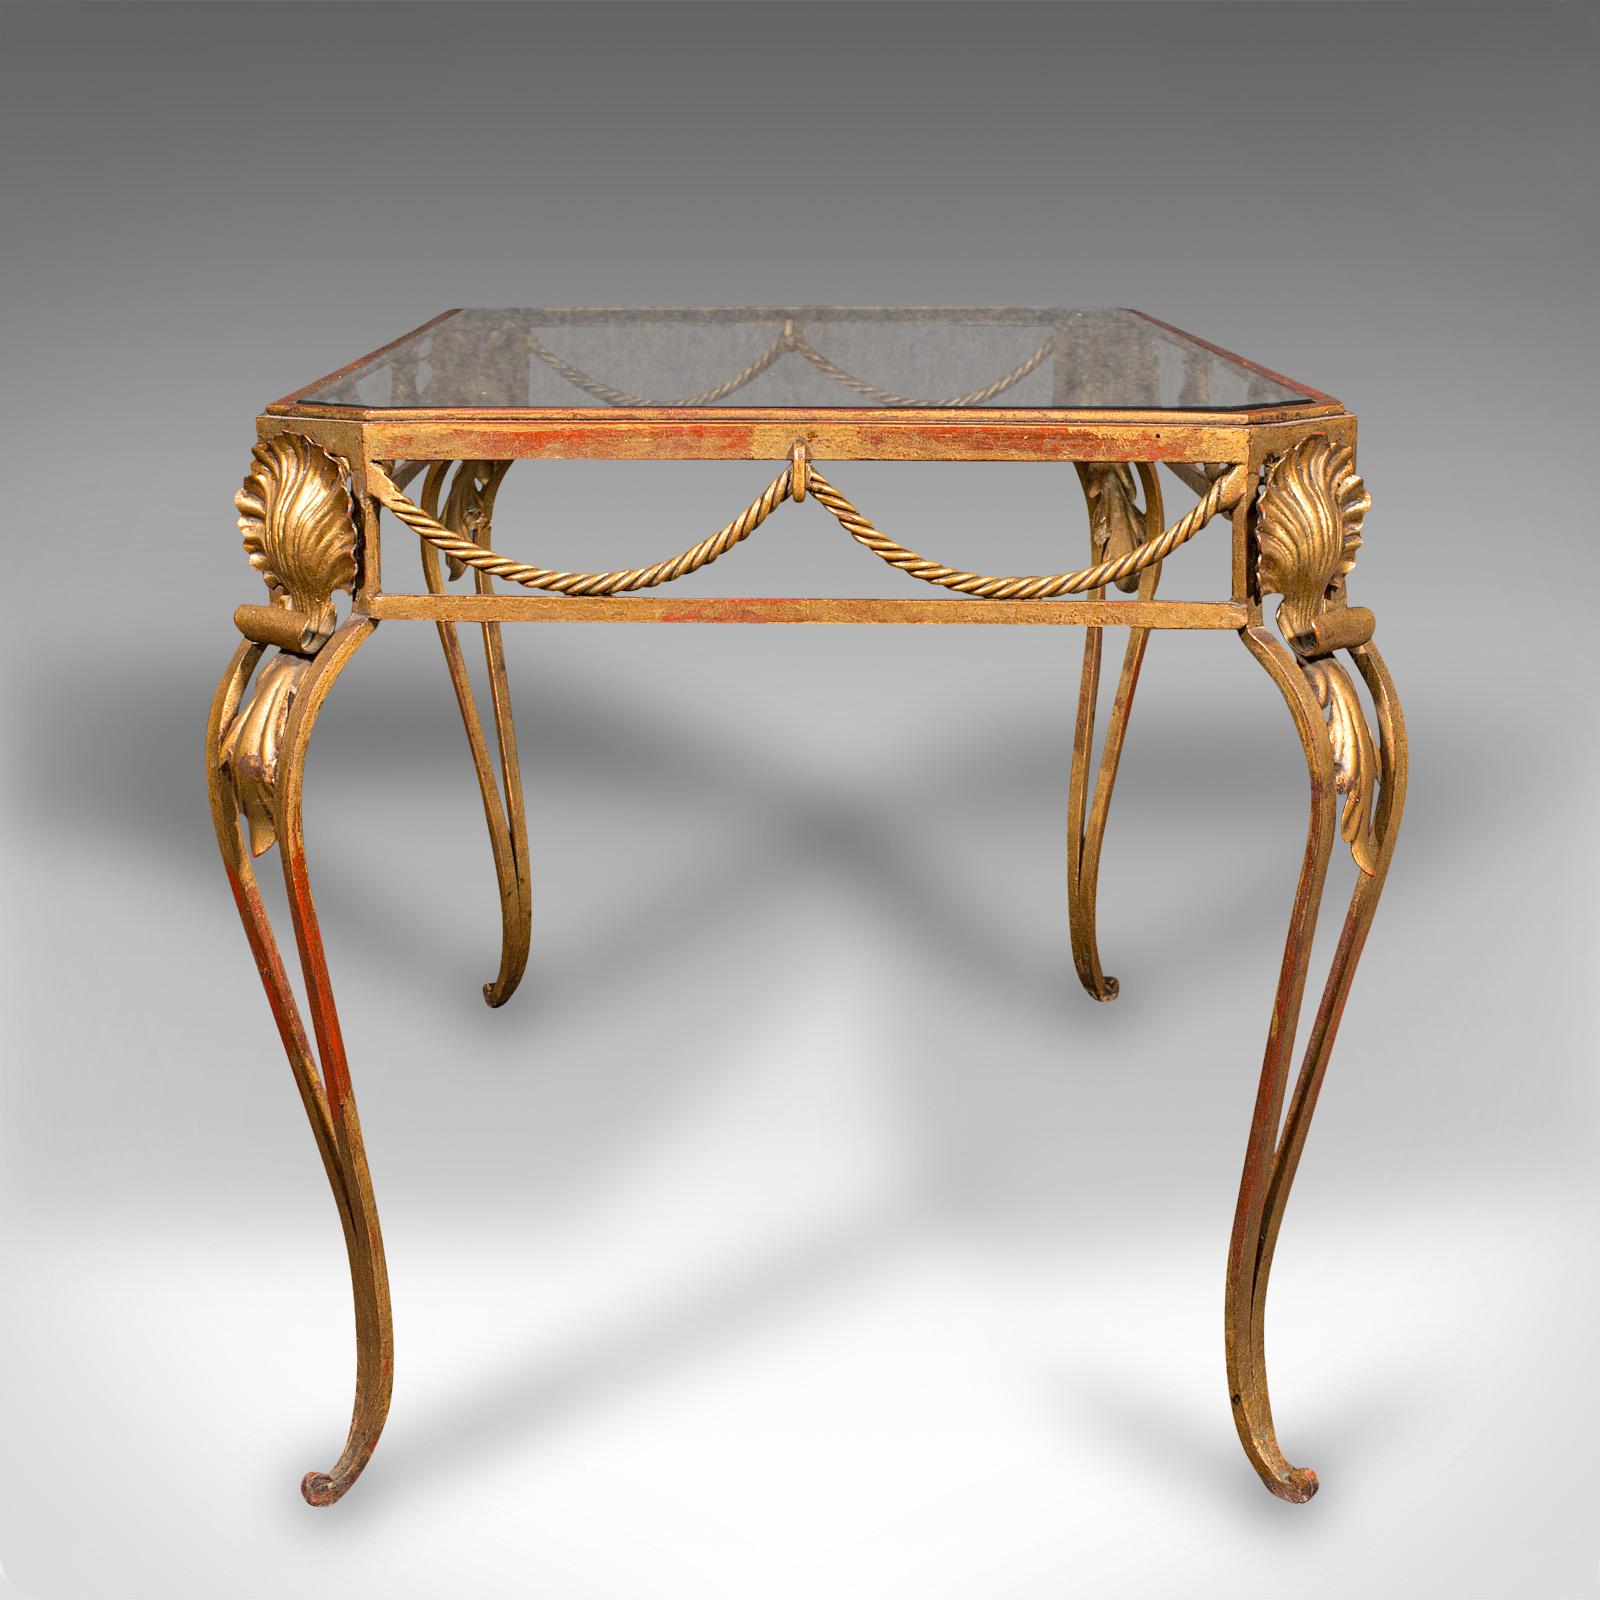 20th Century Antique Glazed Coffee Table, French, Brass, Art Nouveau, Early 20th, Circa 1920 For Sale